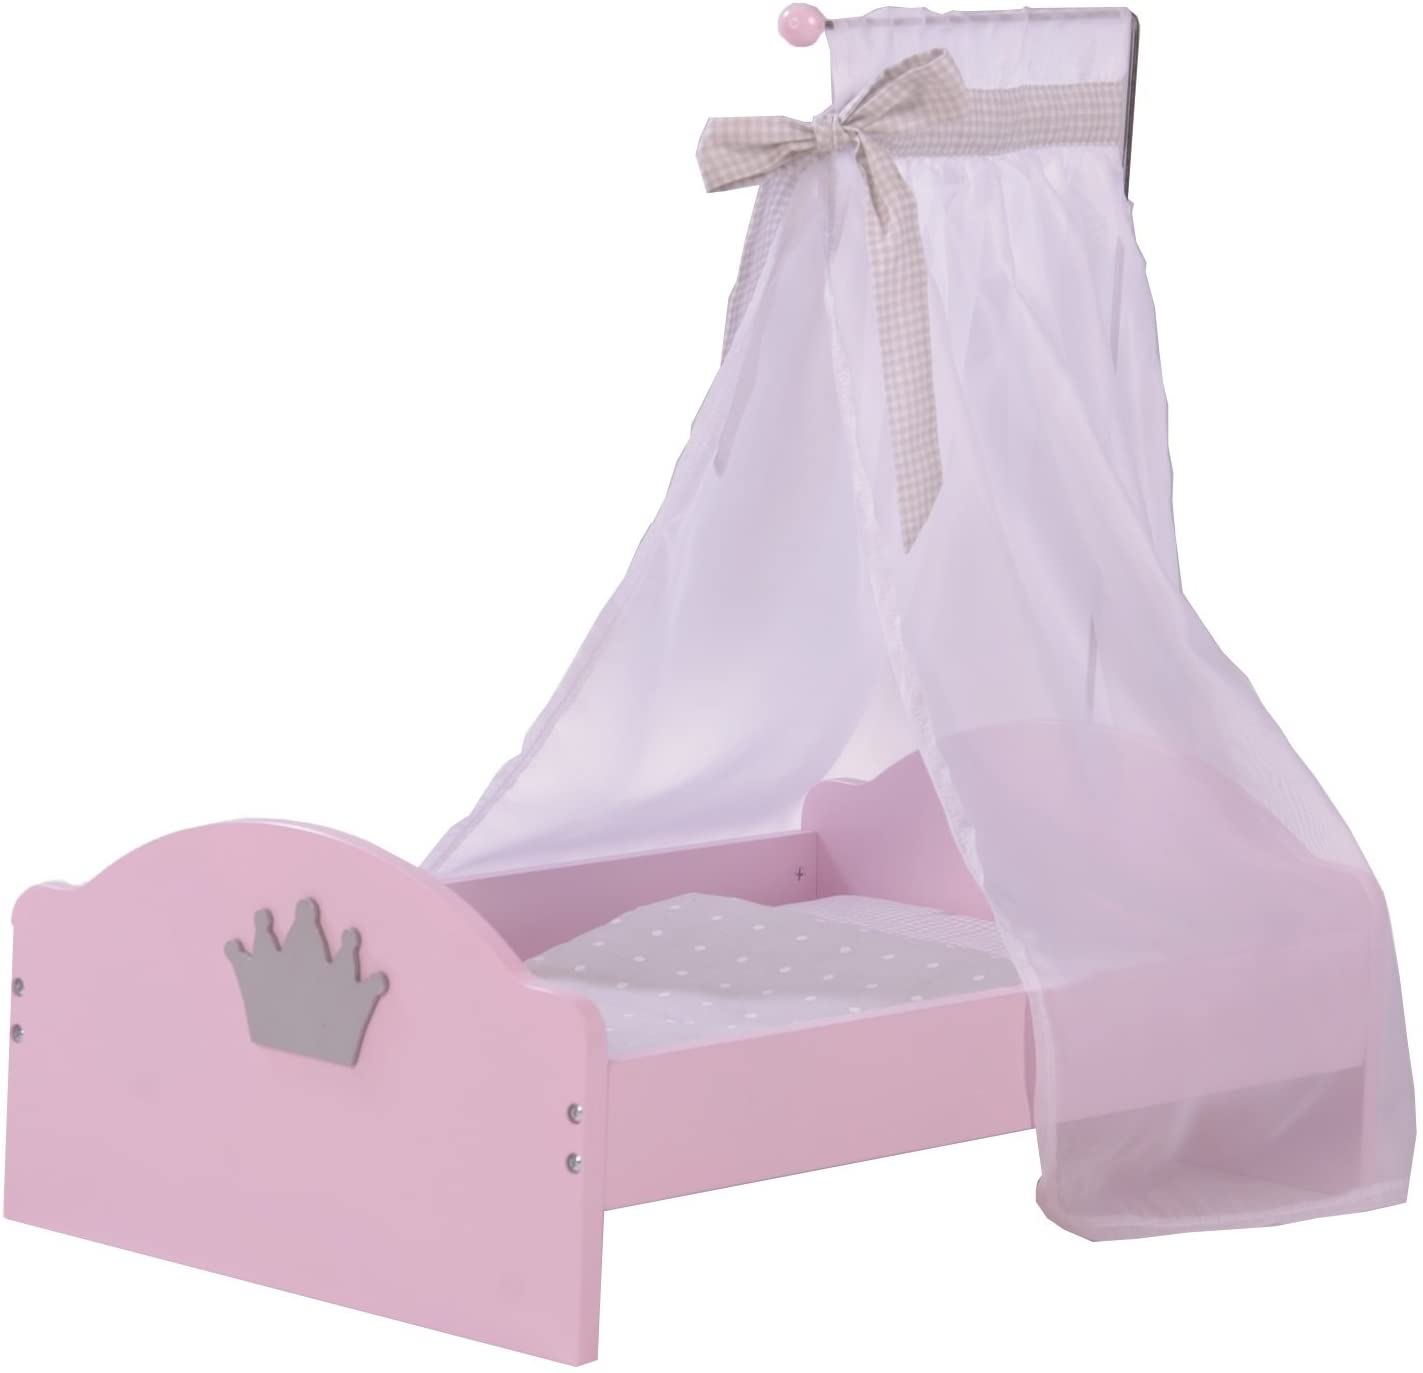 roba Princess Sophie Doll House Furniture and Accessories Painted Pink Doll single bed